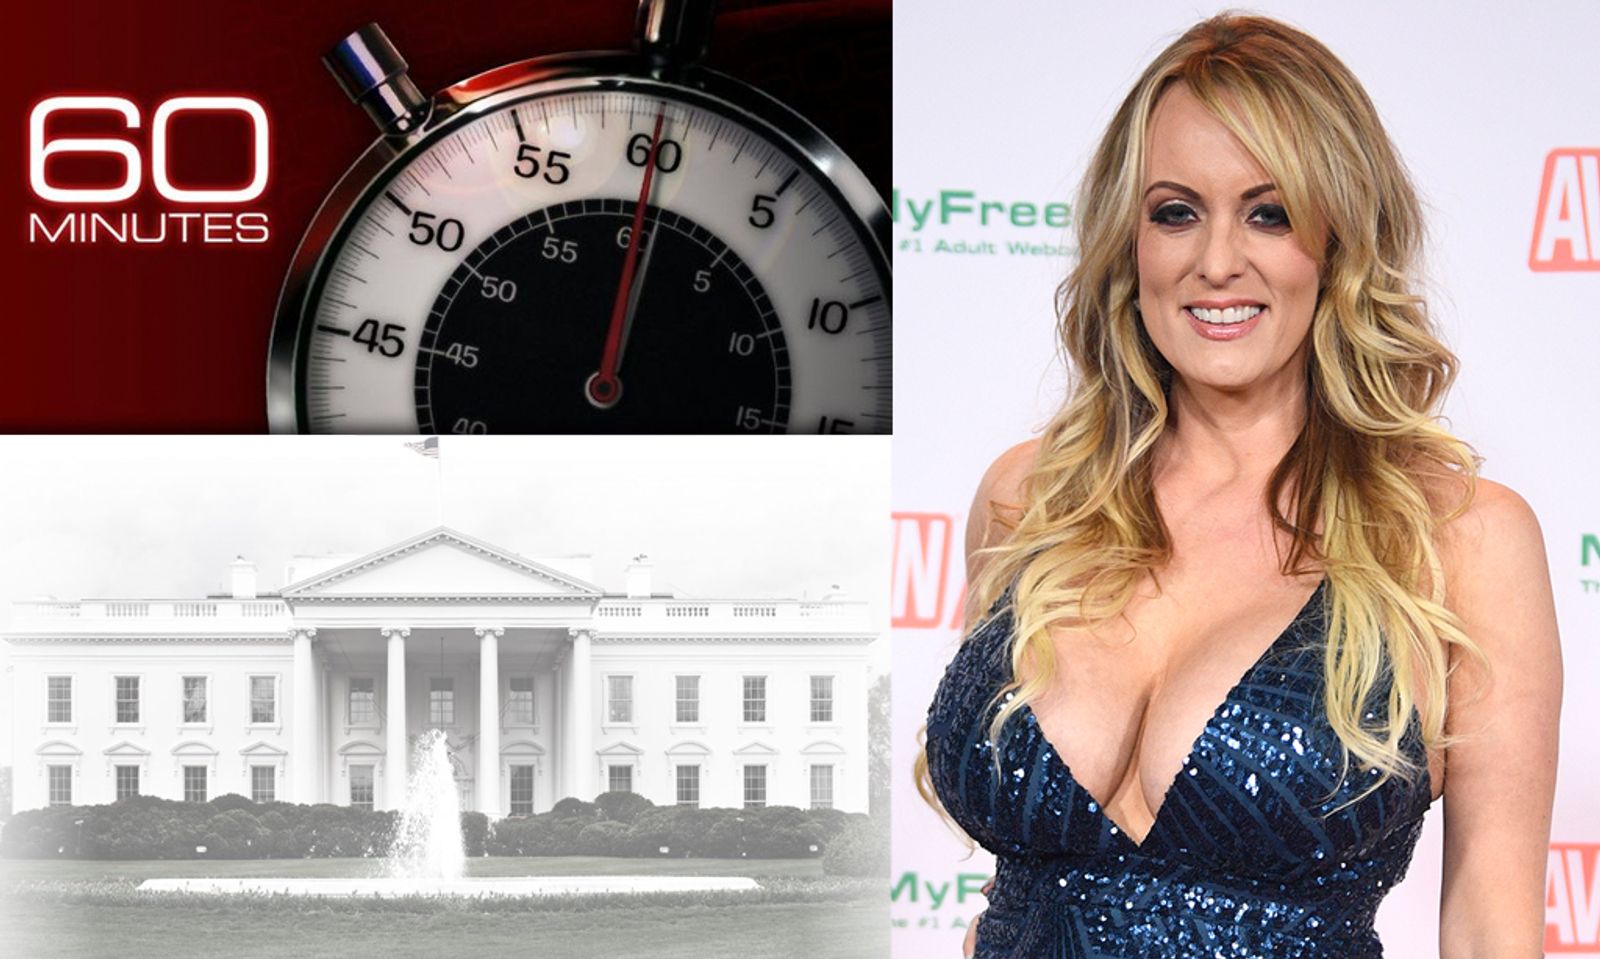 UPDATE: Stormy Daniels Threat Claim Draws Cease-and-Desist Letter